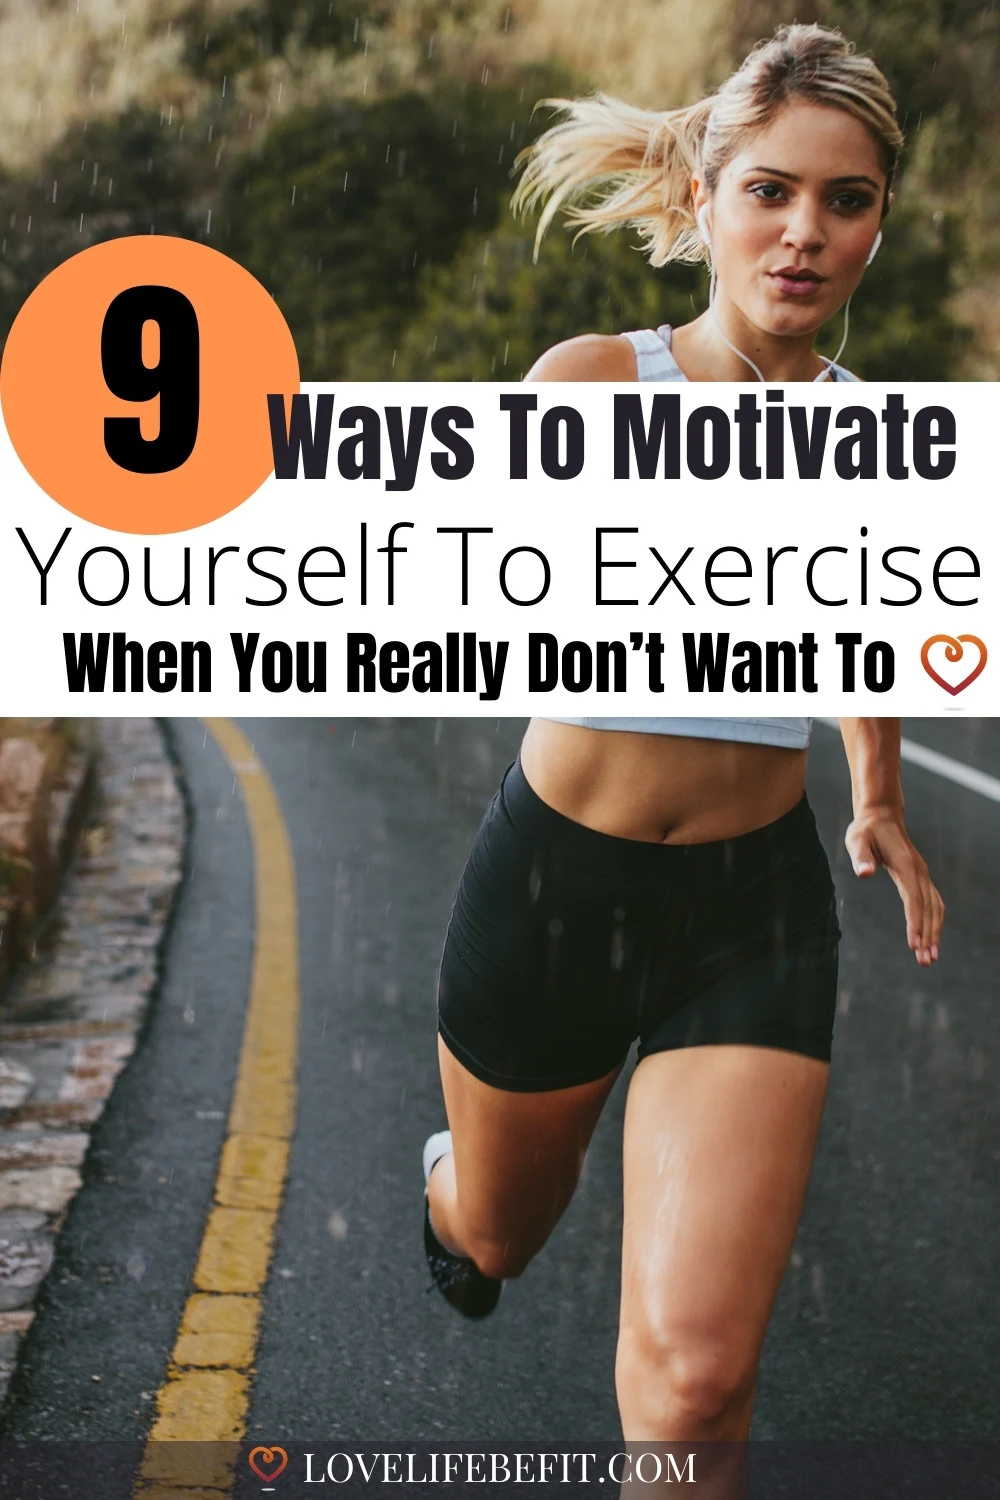 Motivate Yourself To Exercise (When You Really Don't Want To)